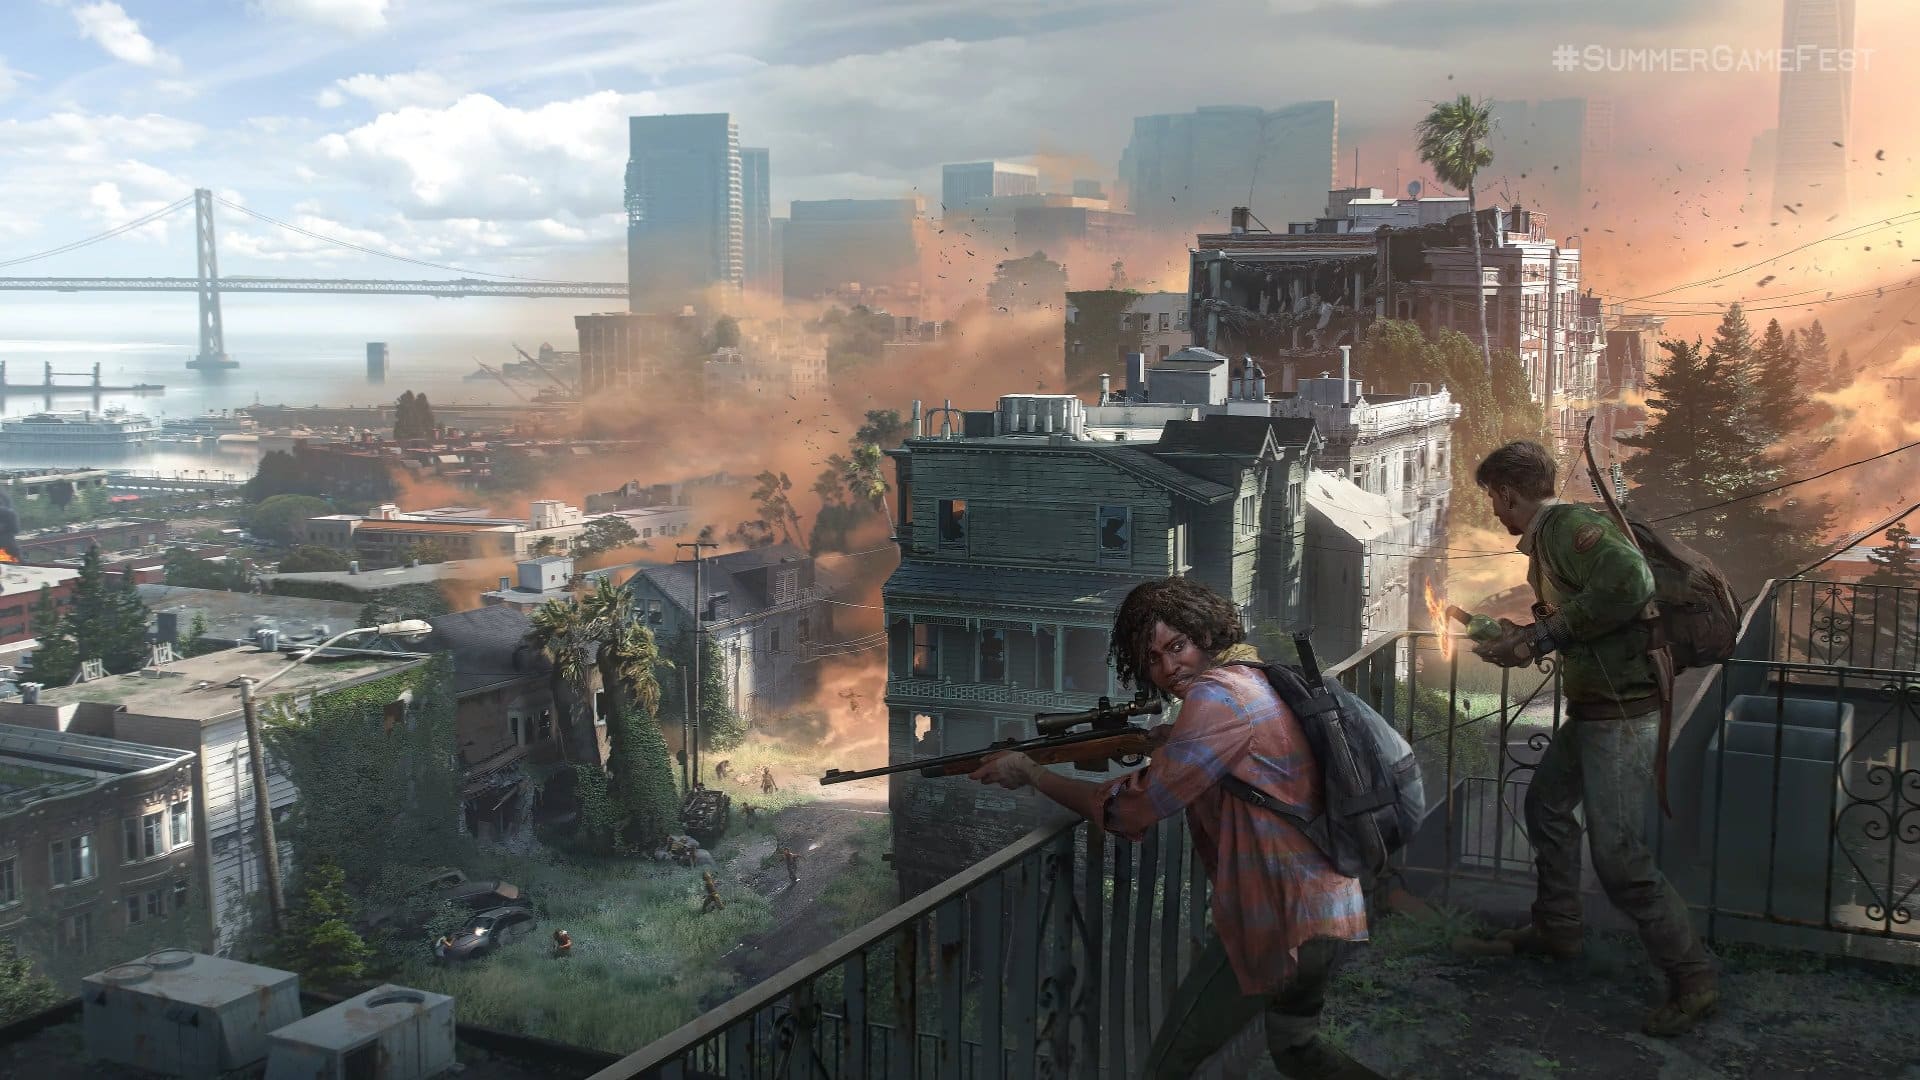 Is 'The Last of Us' Available on Xbox?